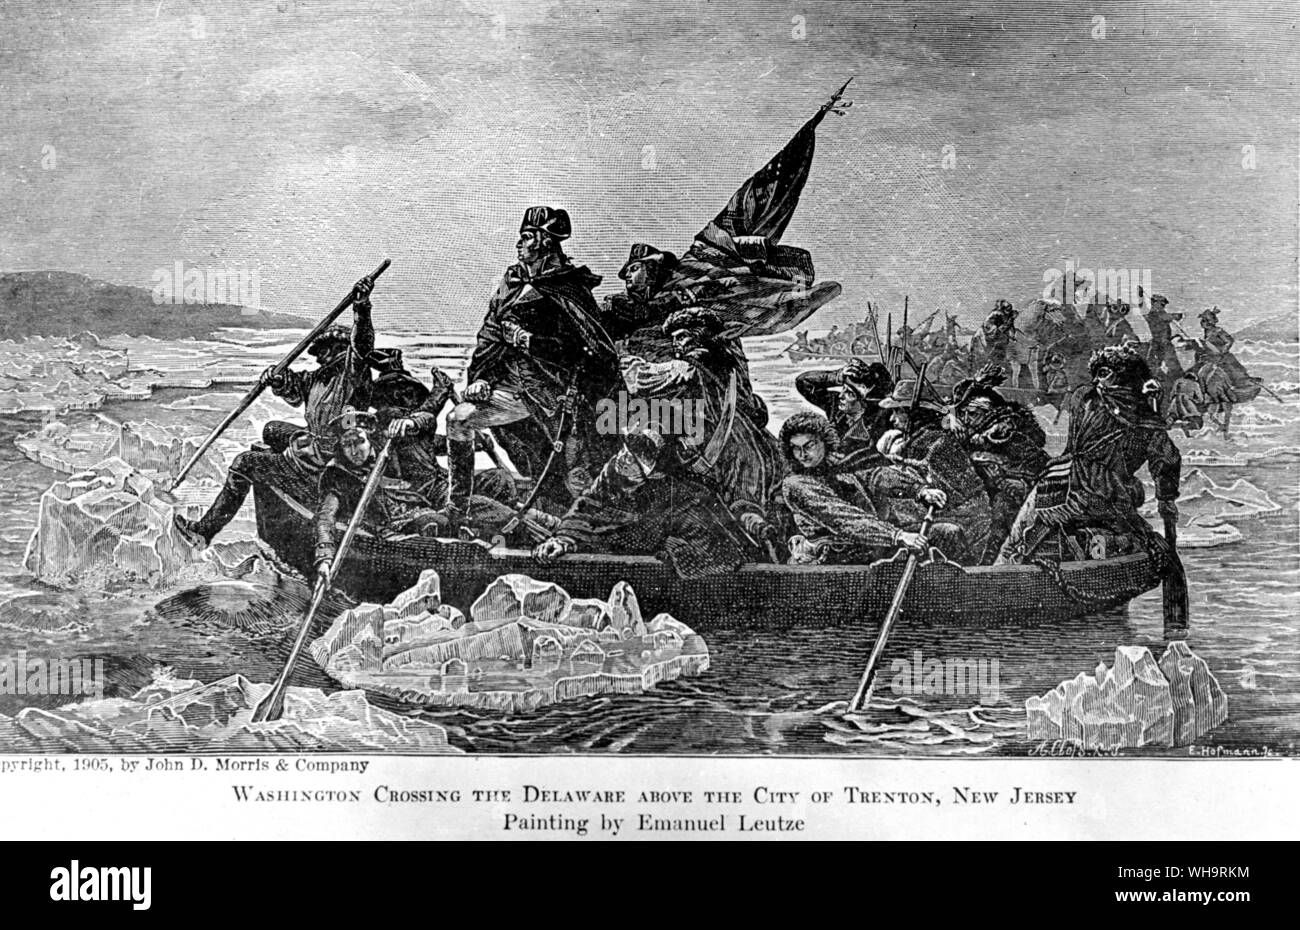 George Washington crossing the Delaware above the City of Trenton, New ...